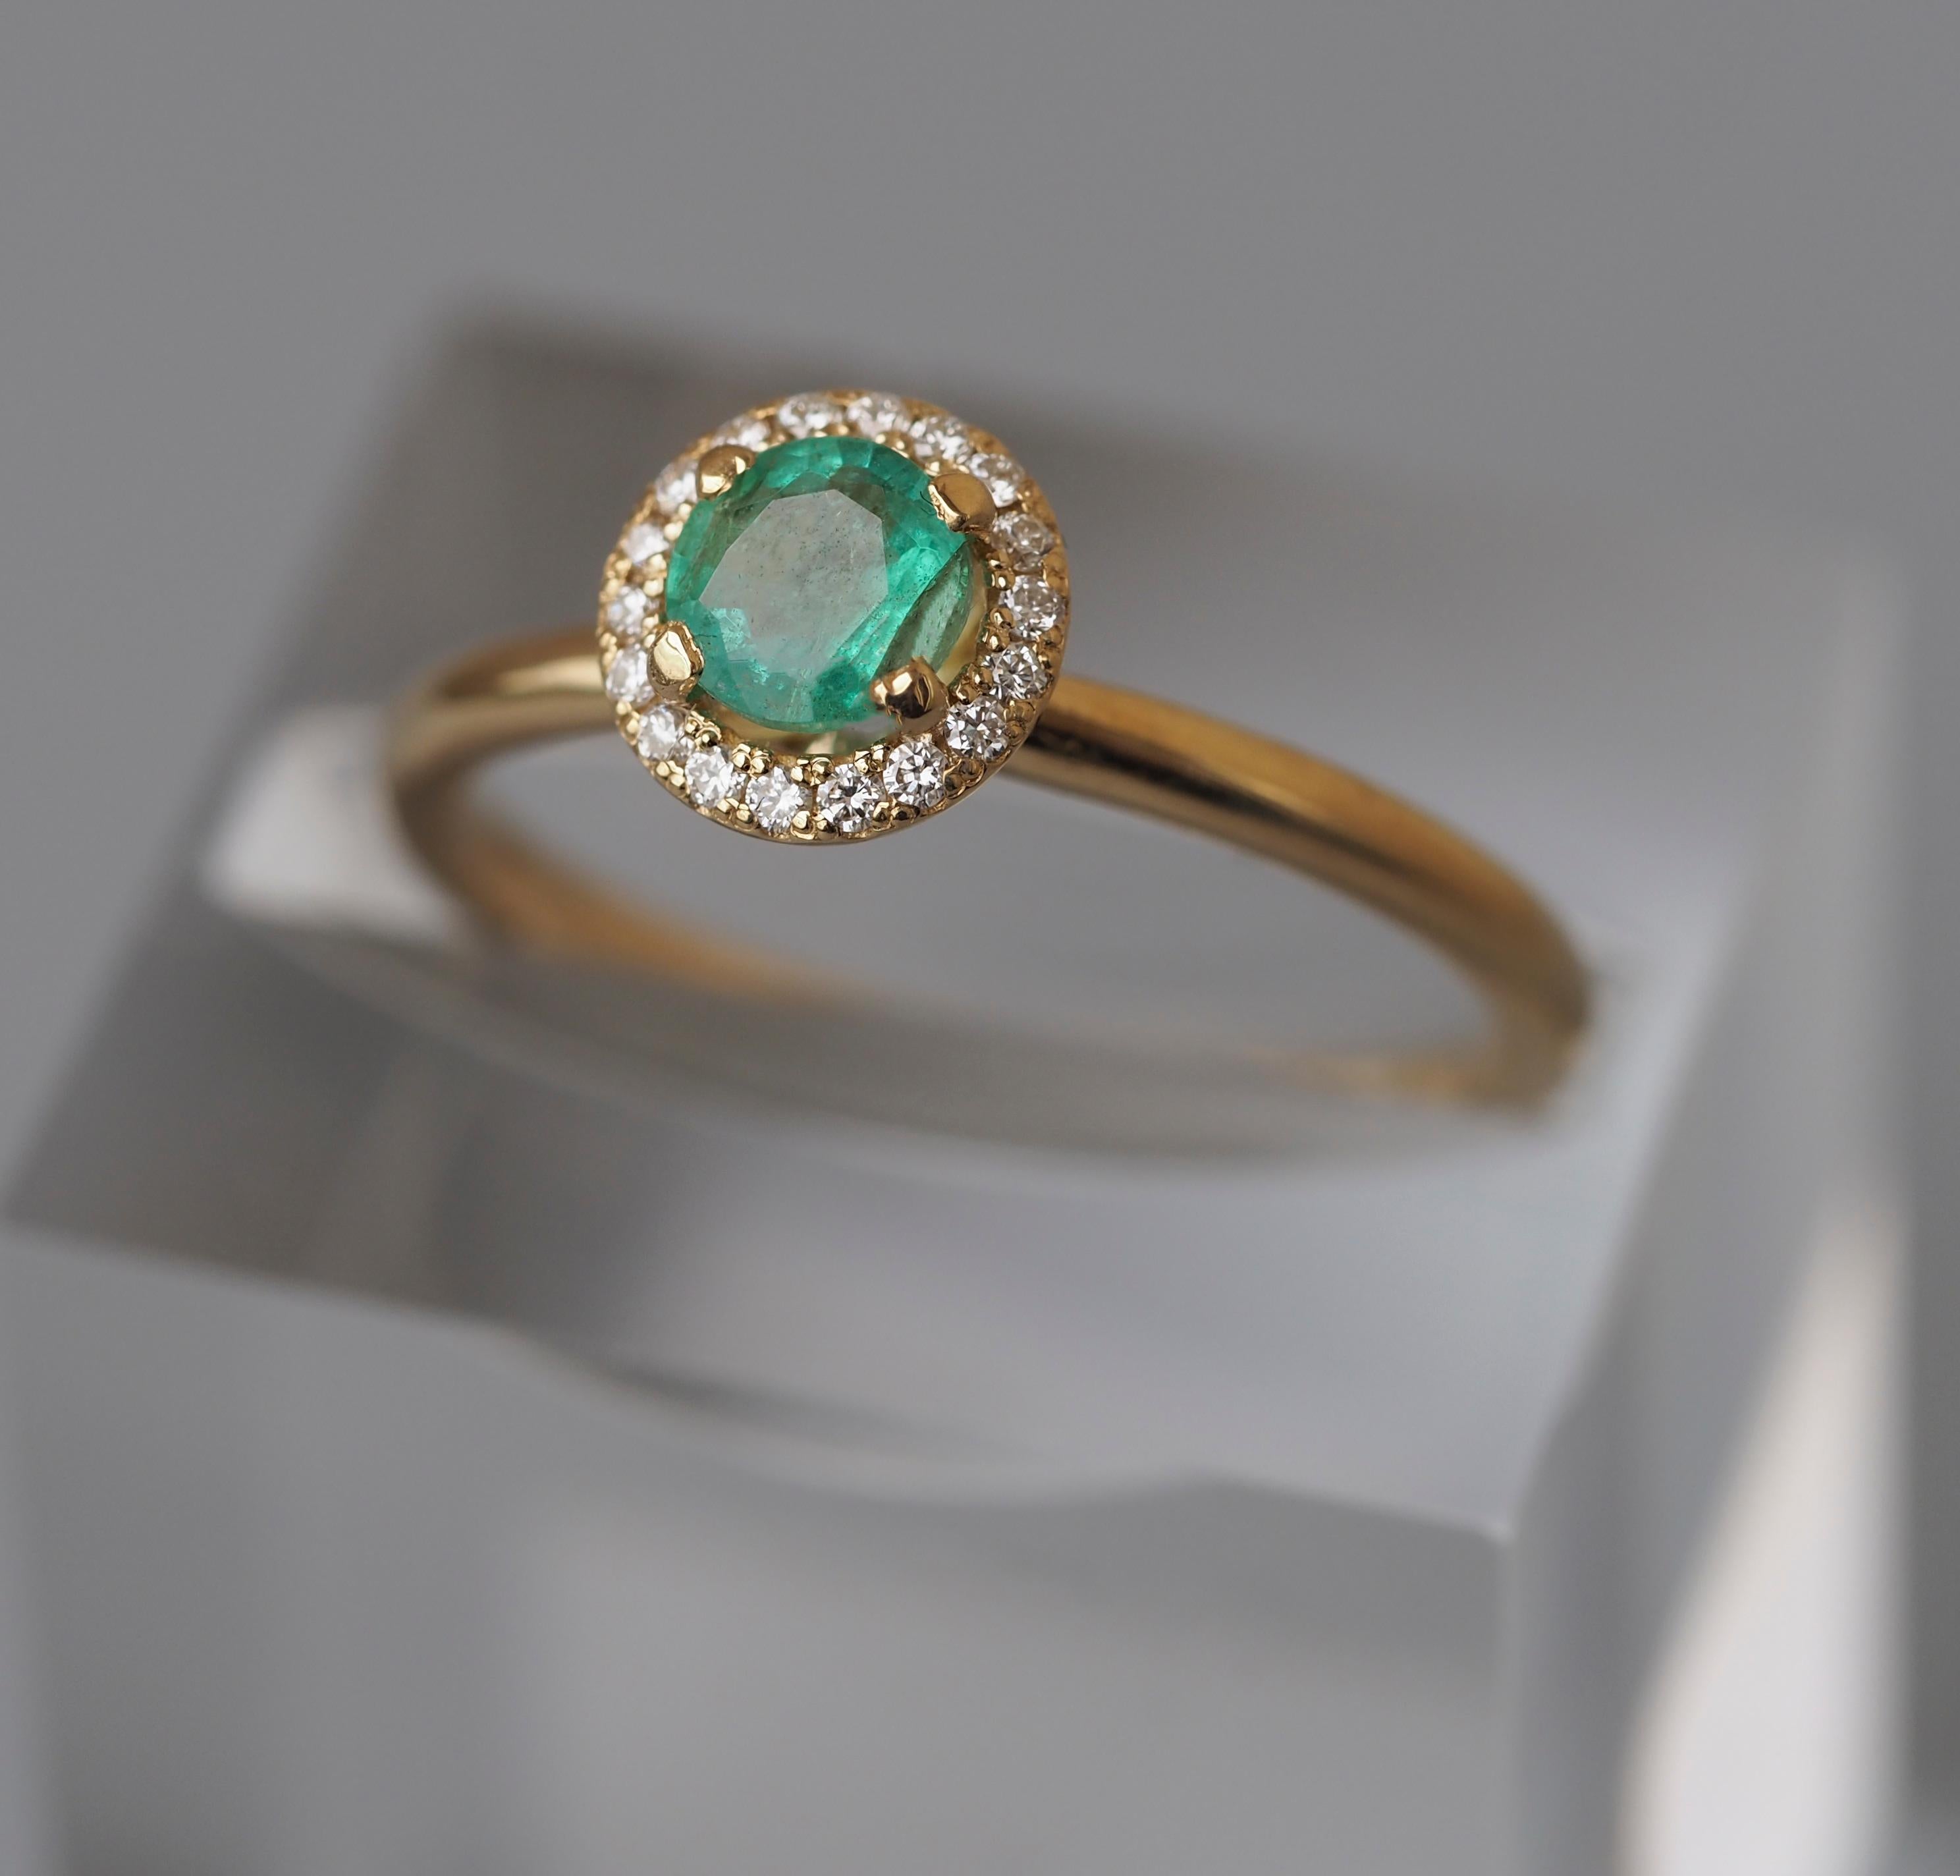 For Sale:  Emerald and Diamonds 14k gold ring.  Emerald Halo Gold Ring. 12